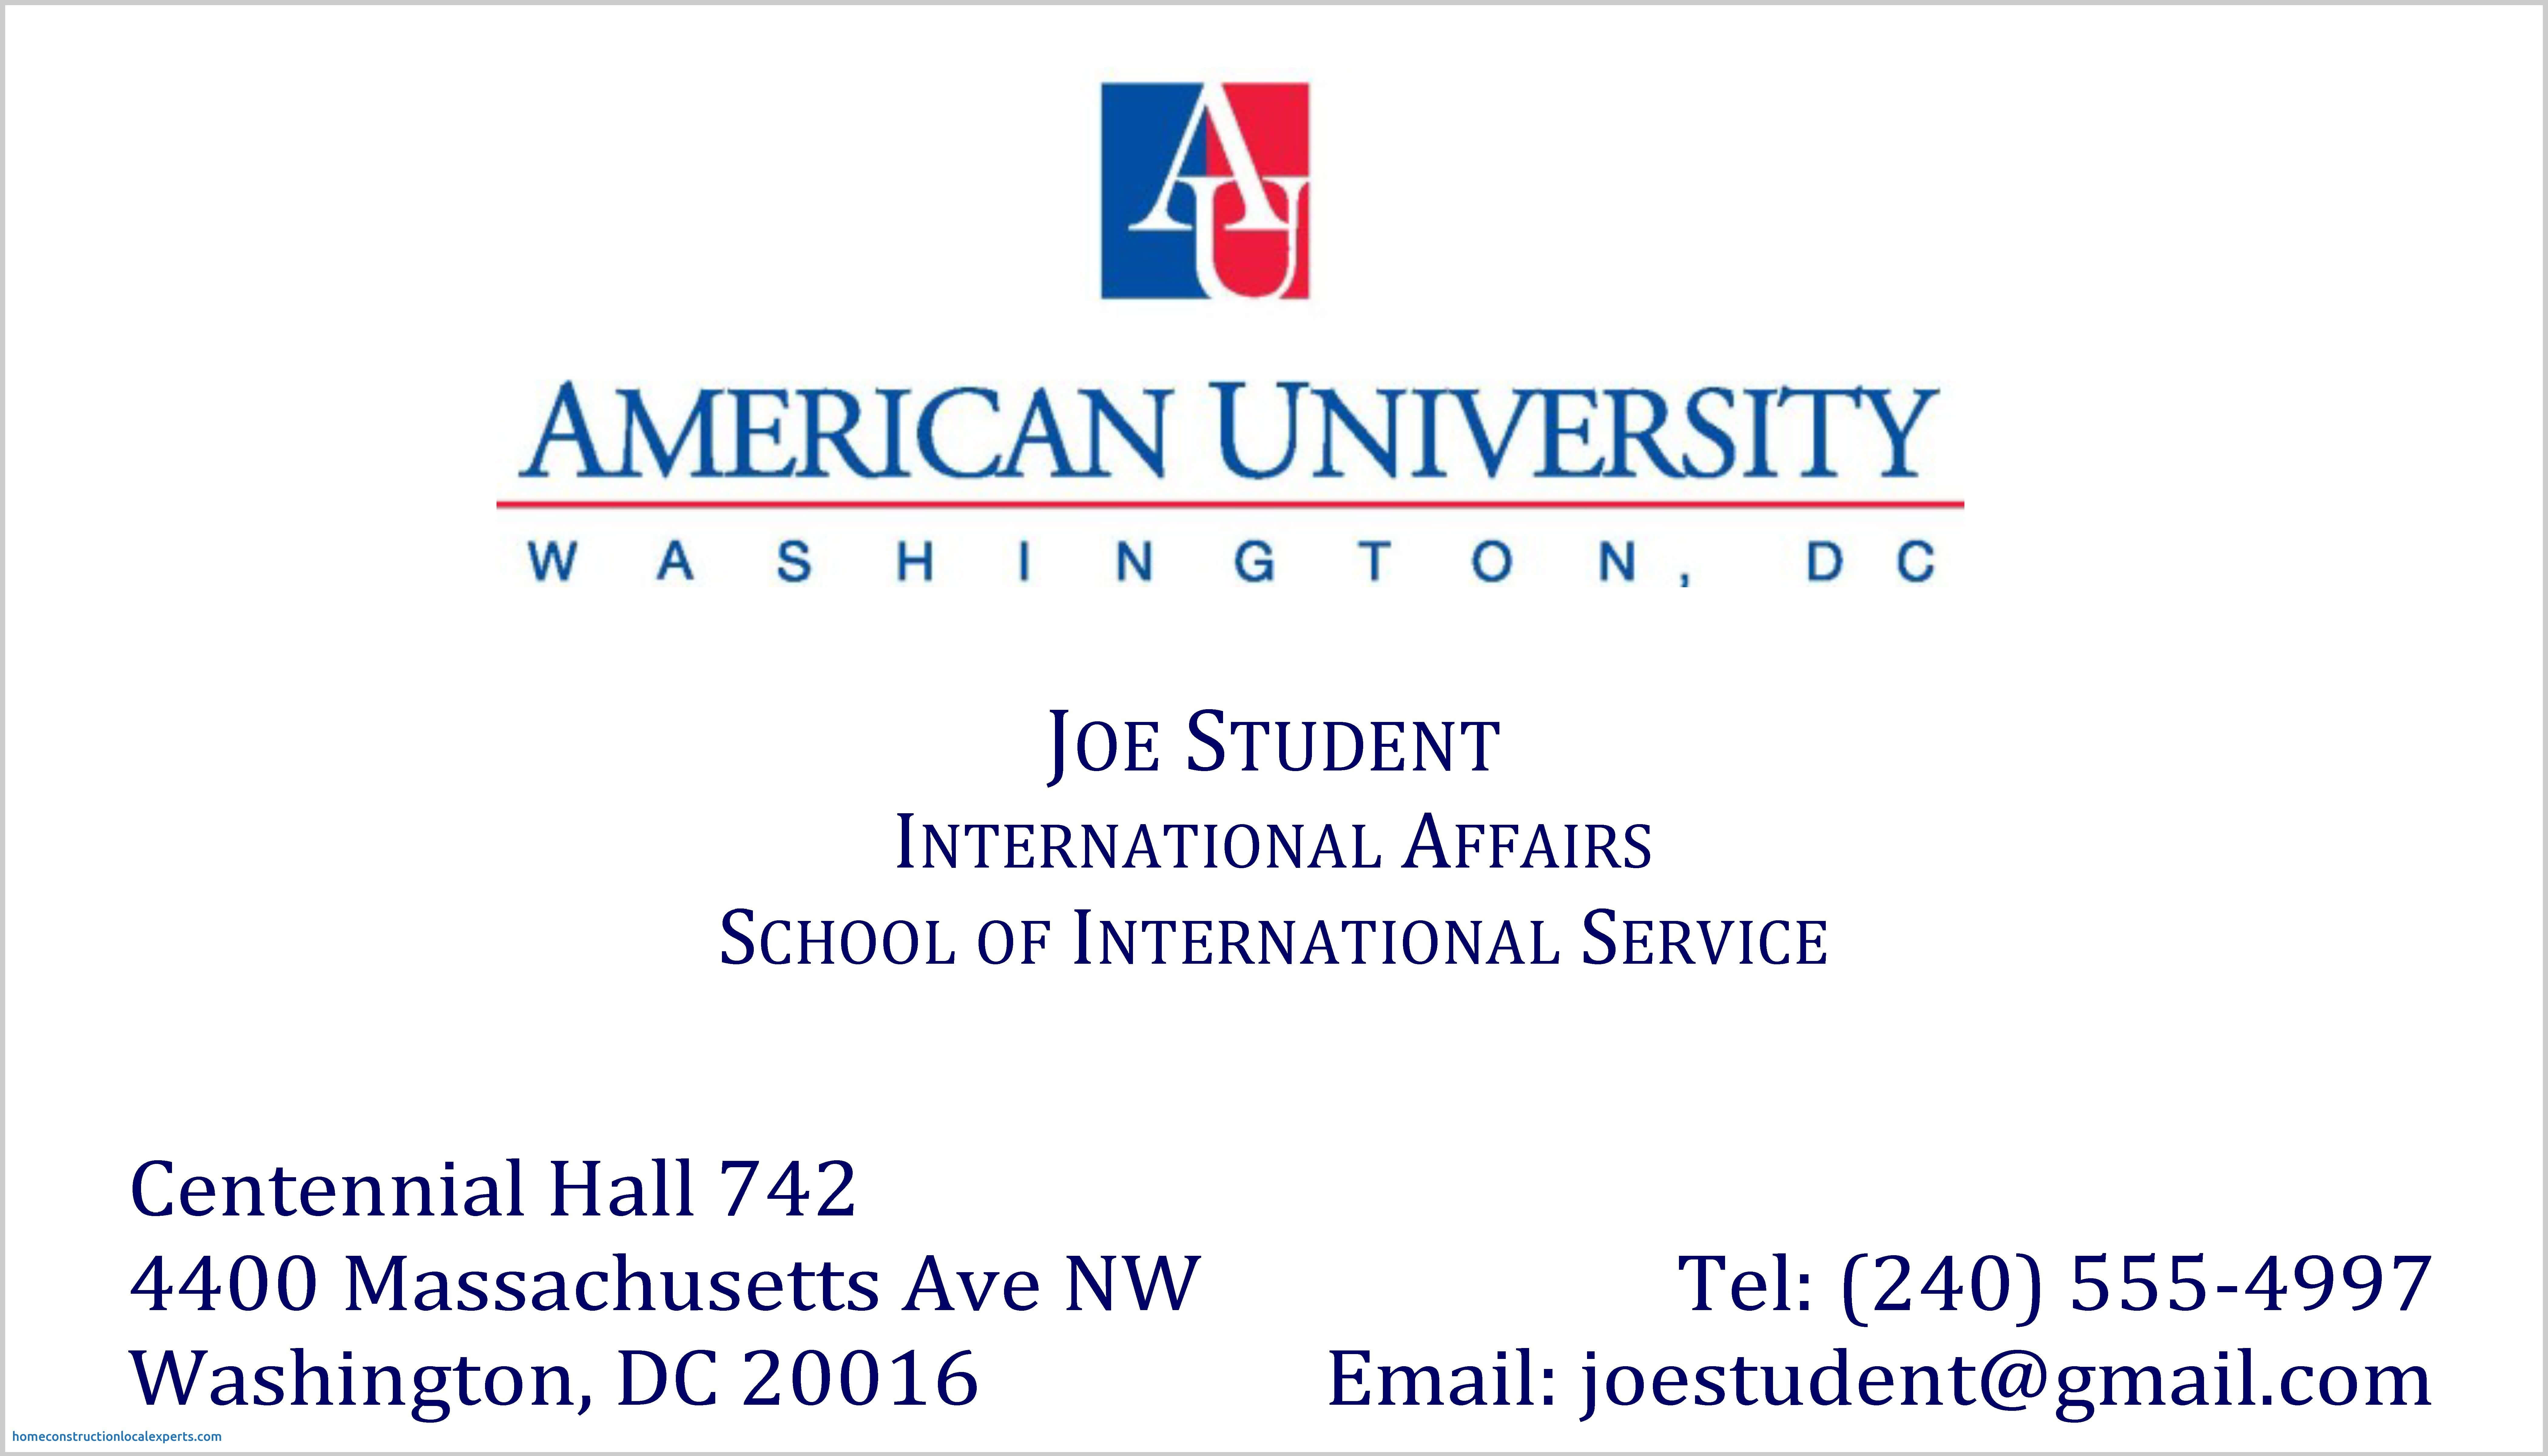 004 Student Business Card Template University Of Arizona Pertaining To Graduate Student Business Cards Template